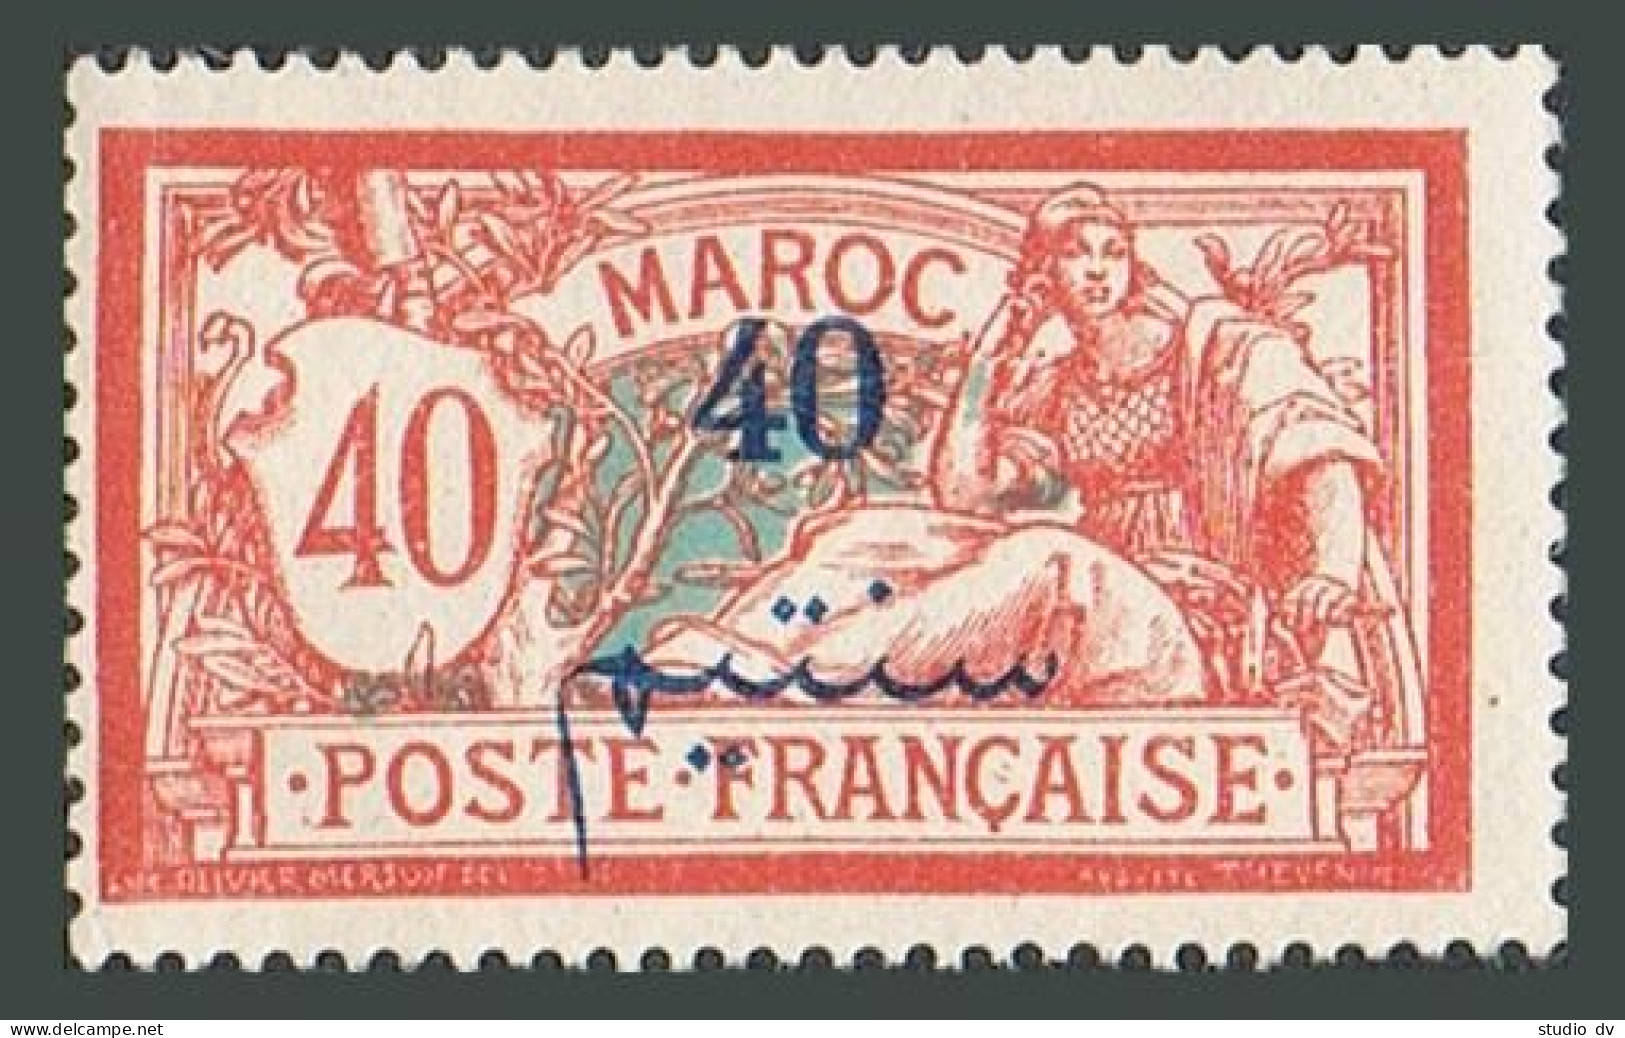 Fr Morocco 35,MNH.Michel 34. Offices In Morocco,40 Centimos Surcharged In Blue. - Marokko (1956-...)